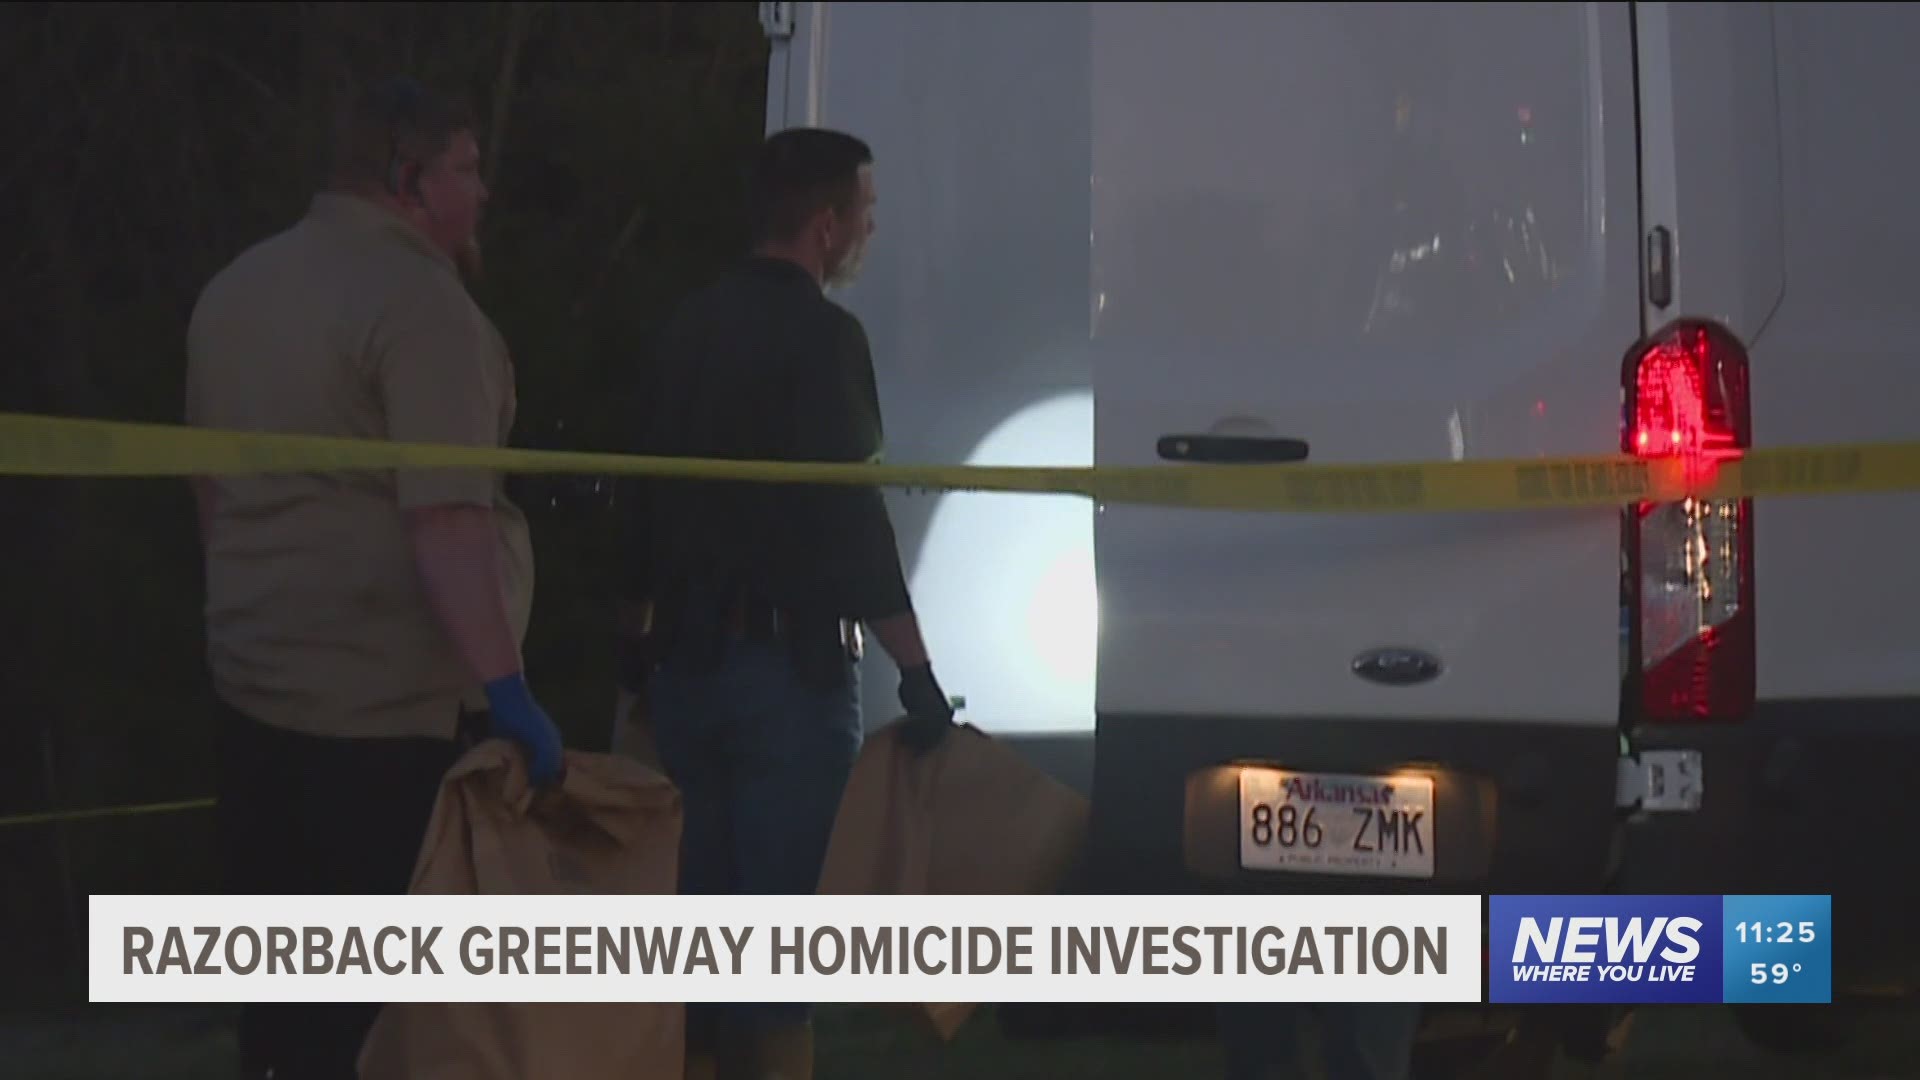 Police investigate homicide after woman's body found near Razorback Greenway